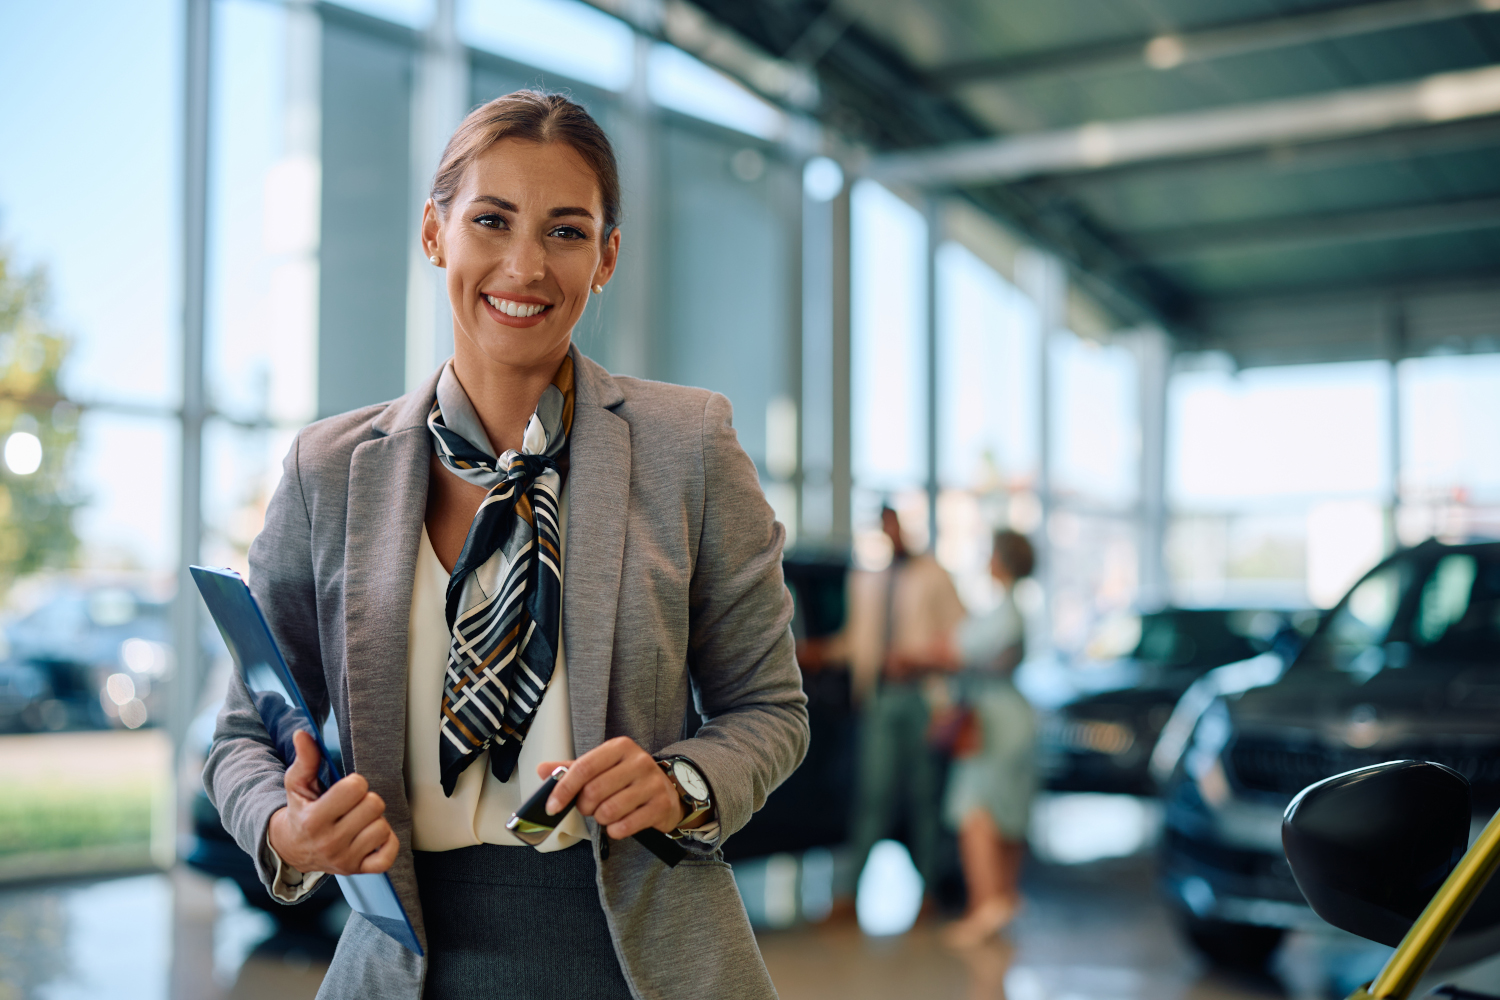 The Unexpected Benefits of Financing Your Car How Auto Loans Can Improve Your Credit Score